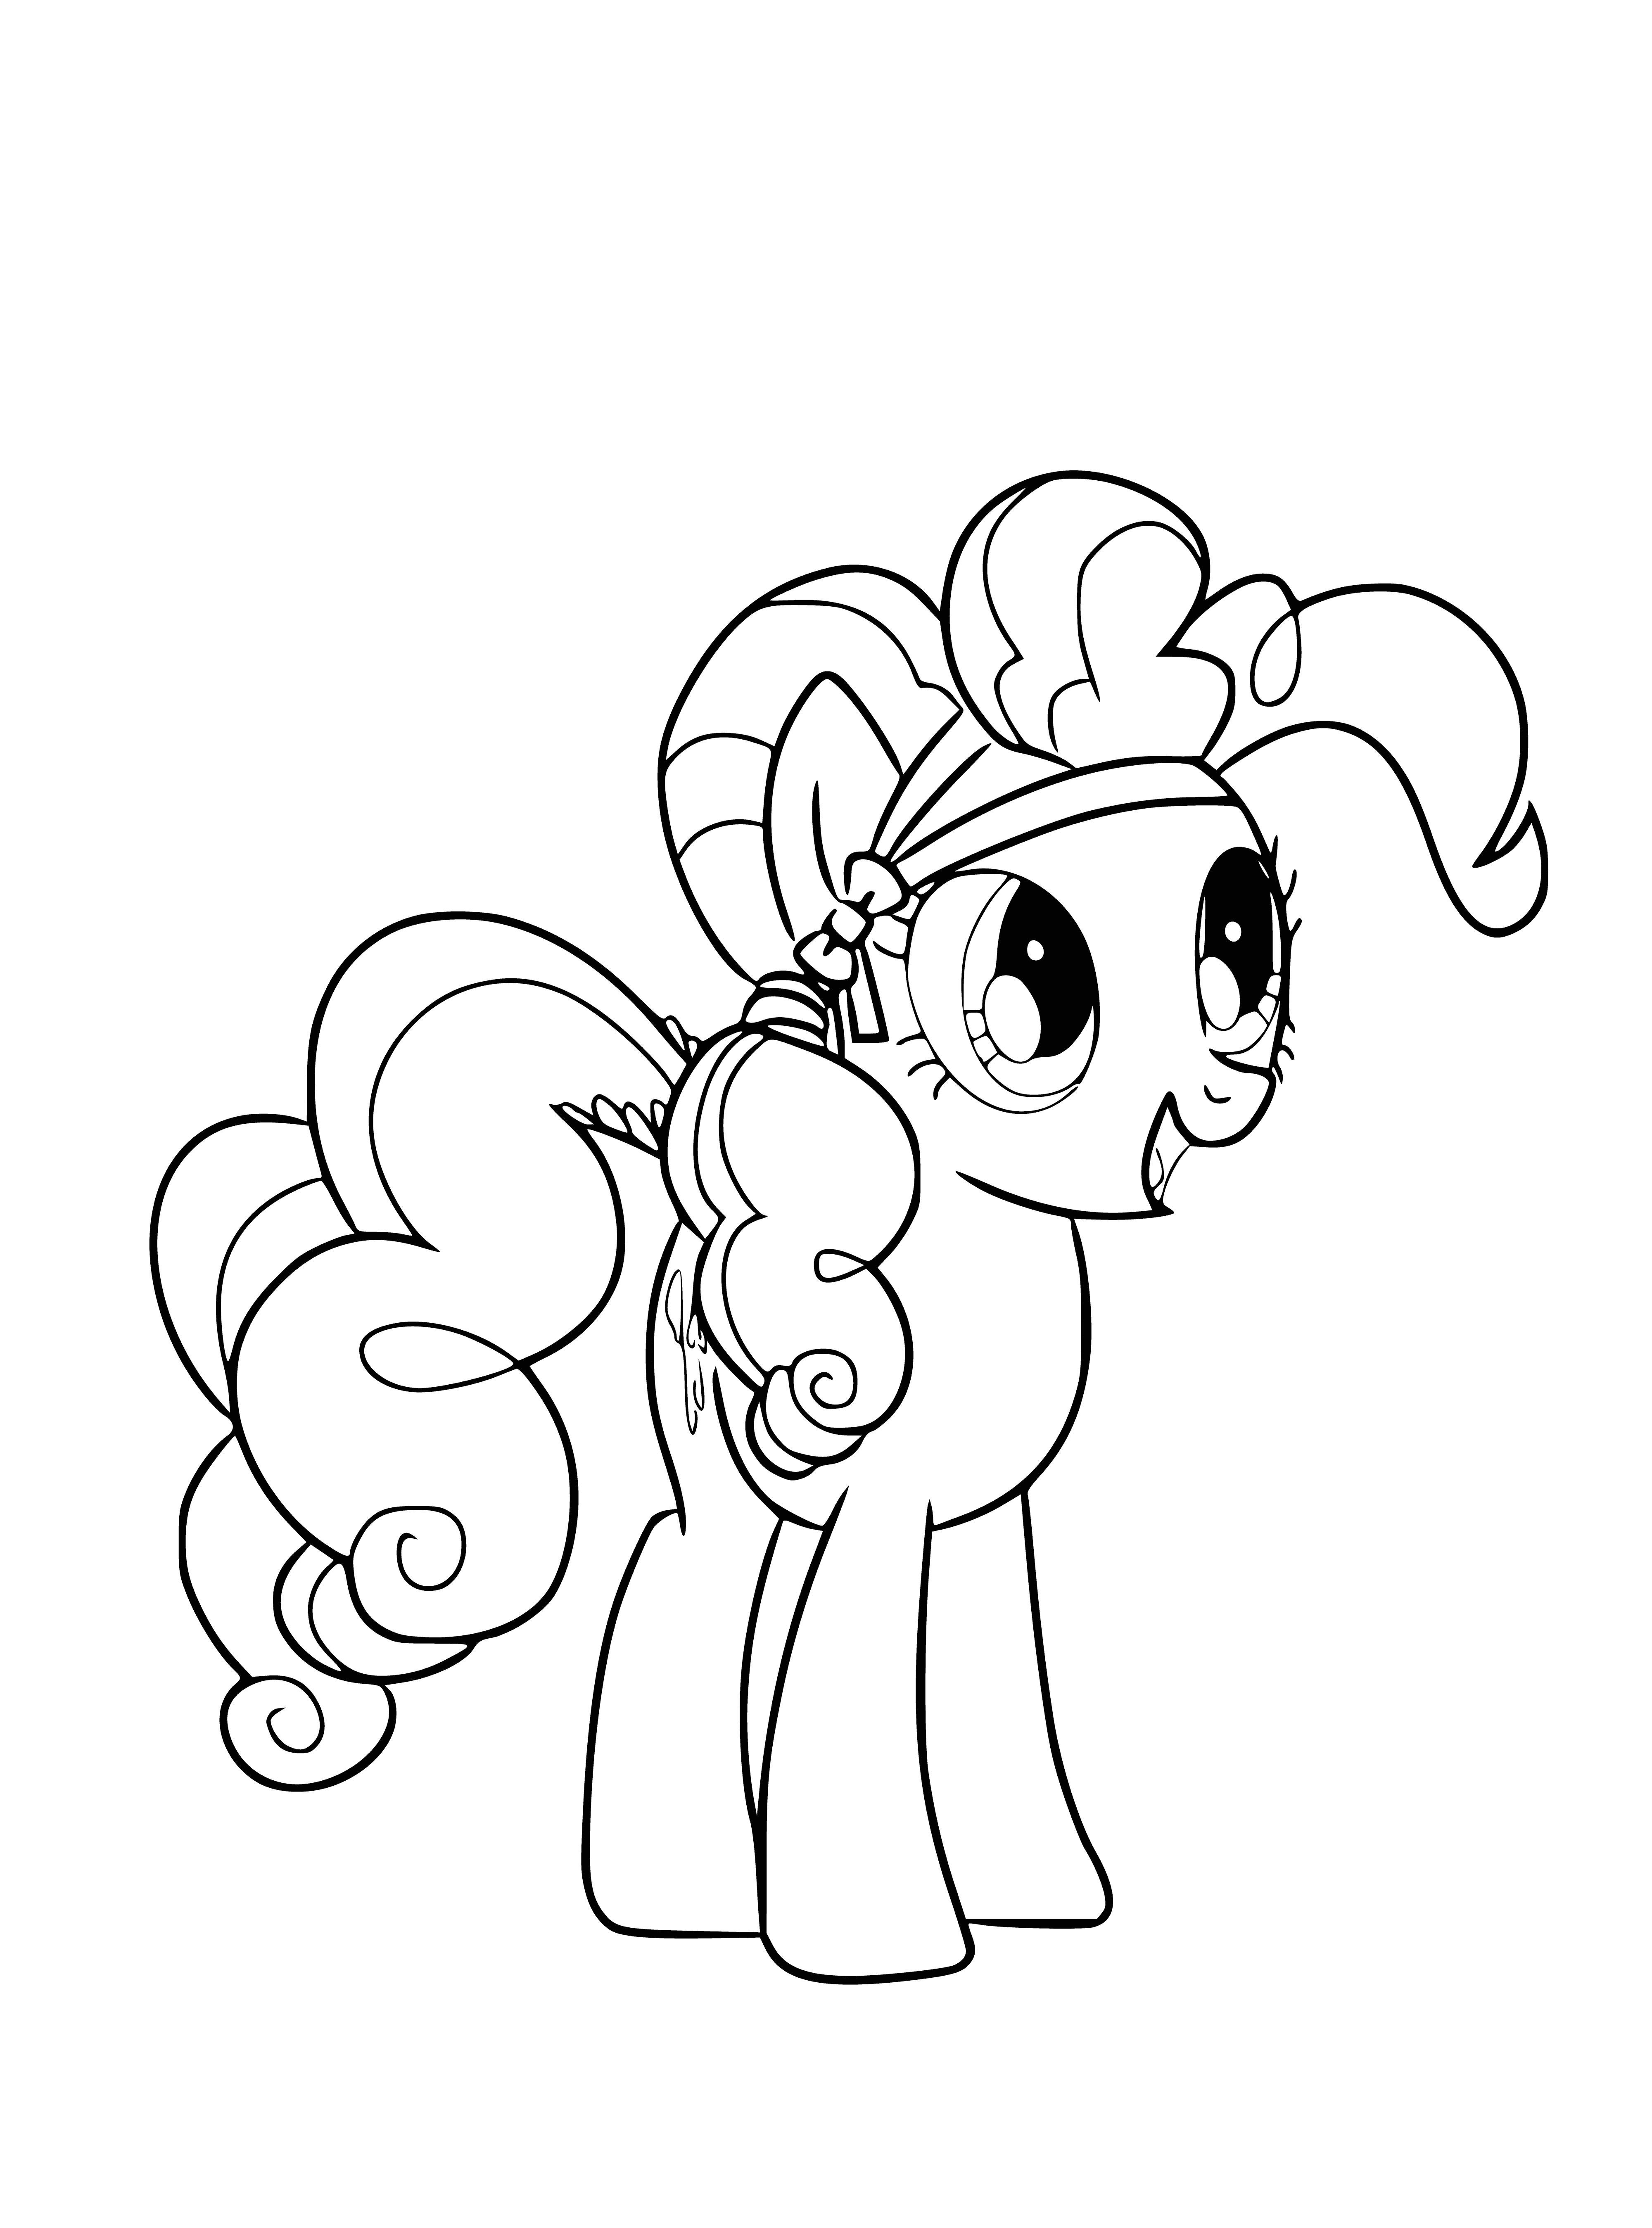 She loves to play games and have parties with her friends.

Pink pony with curly mane/tail loves playing games/having parties. Cutie mark is 3 pink balloons!